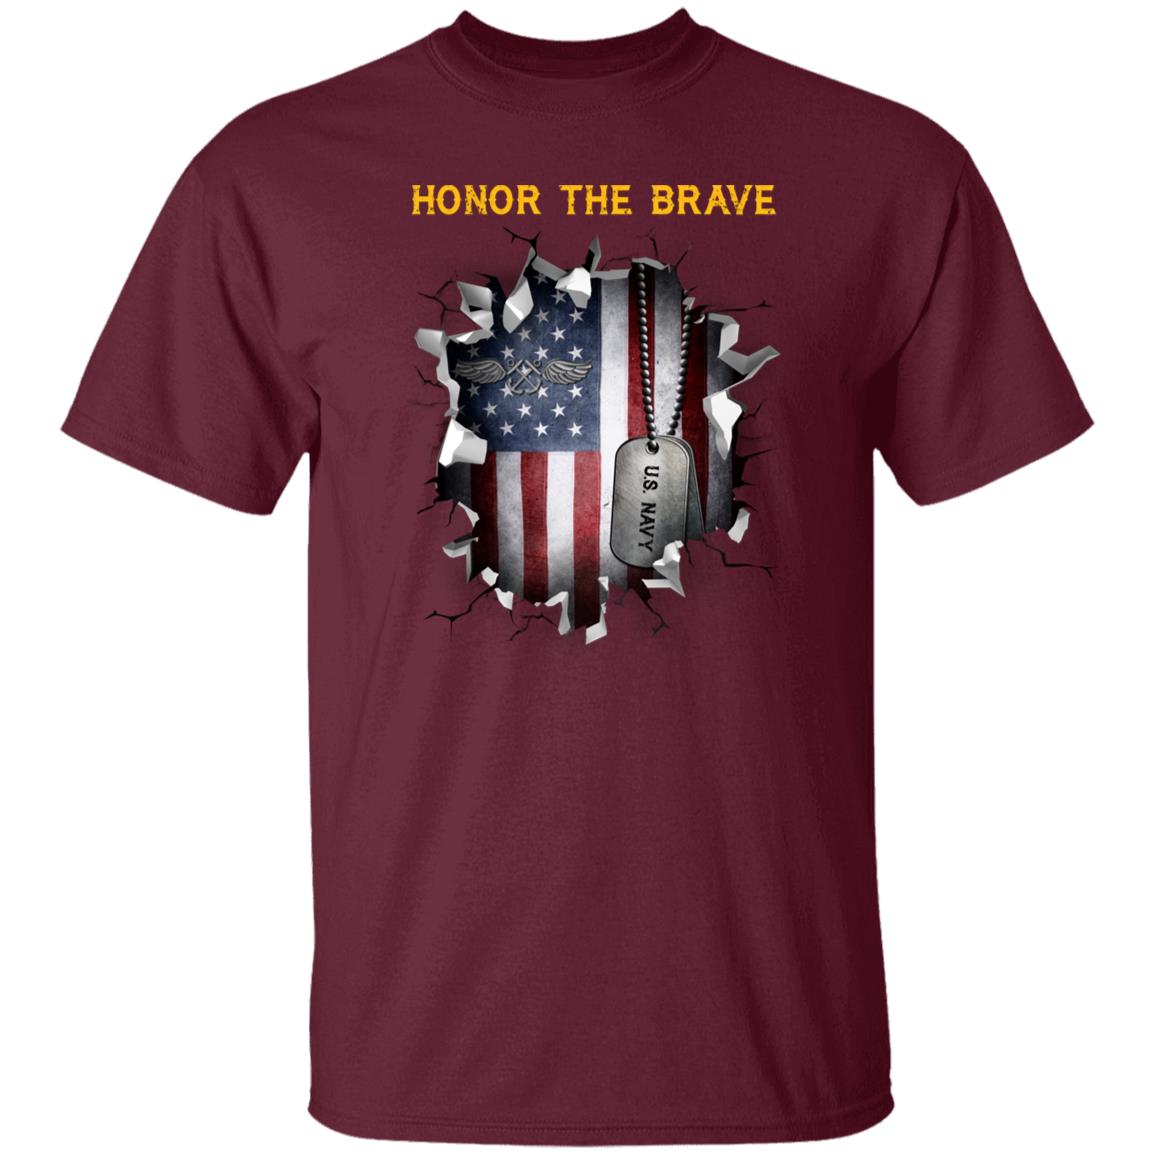 U.S Navy Aviation Boatswain_s Mate Navy AB - Honor The Brave Front Shirt